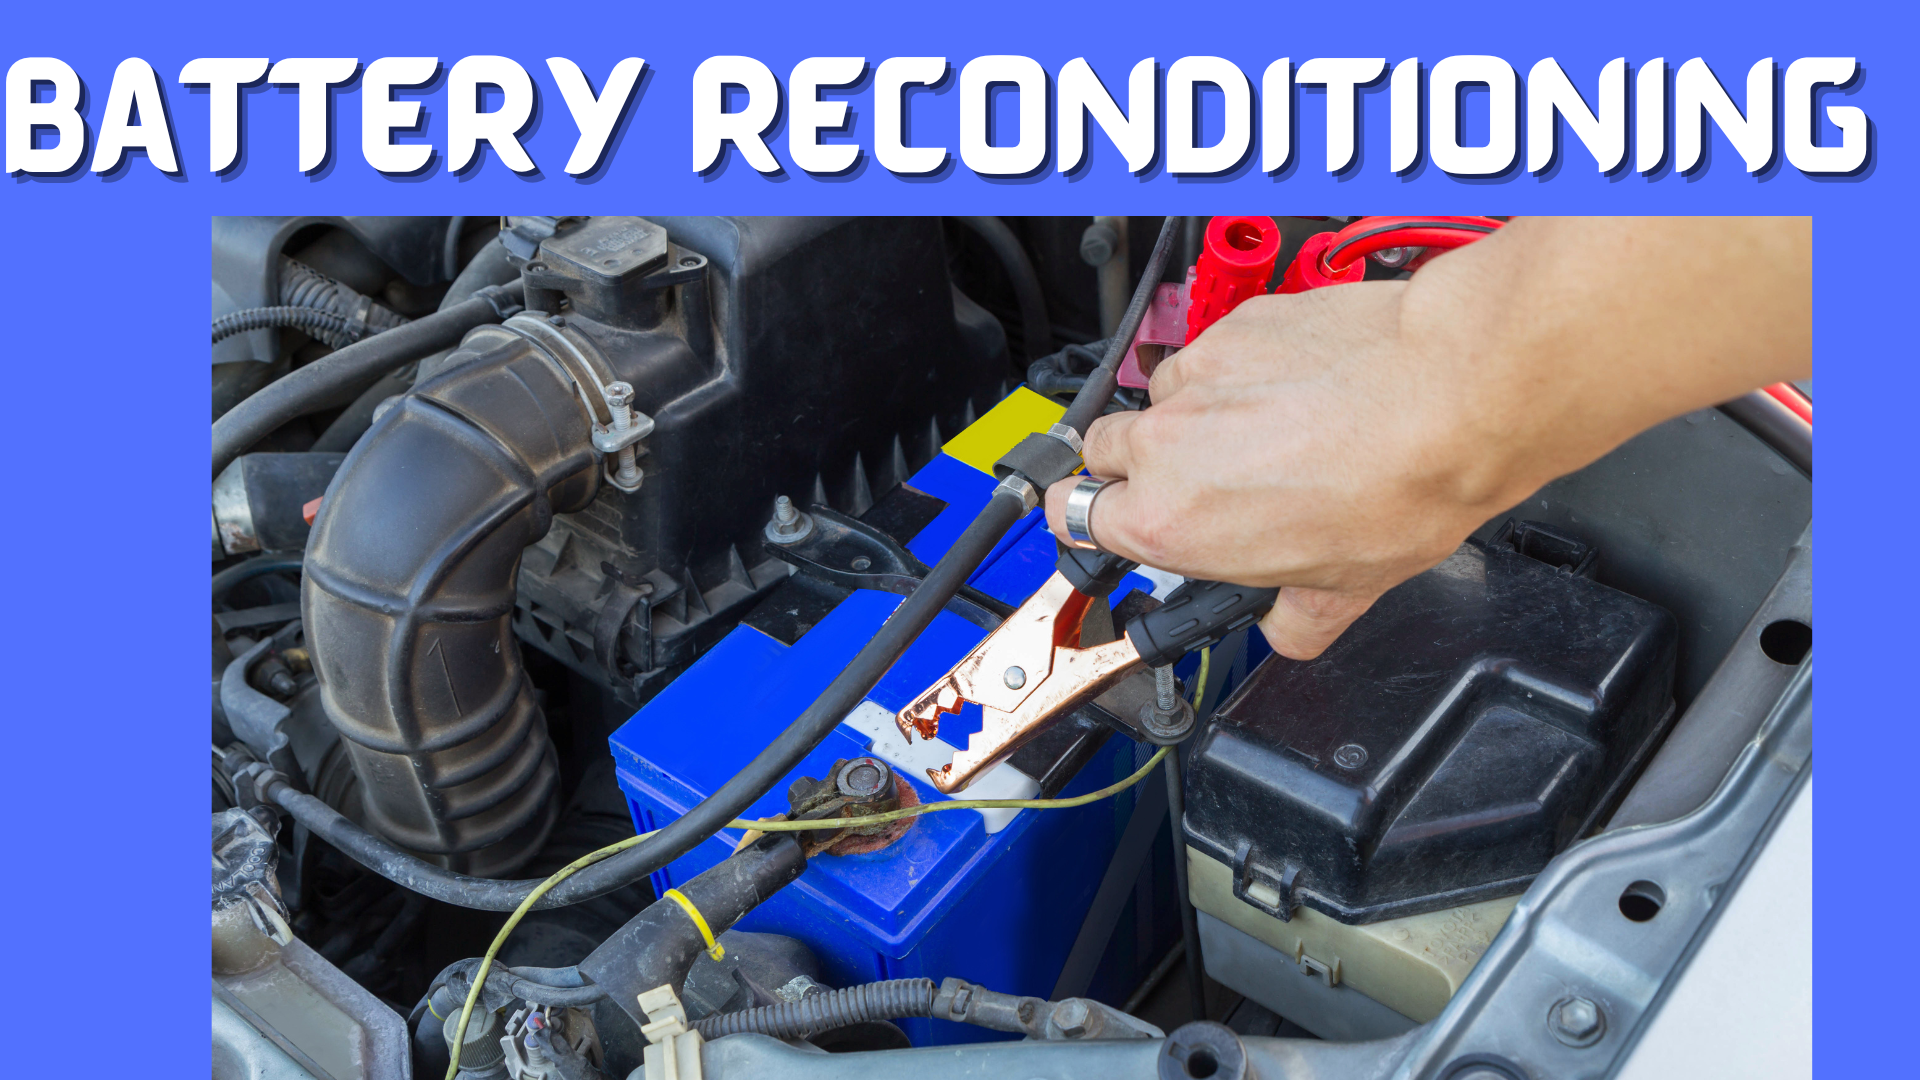 5 Easy Steps To Truck Battery Reconditioning